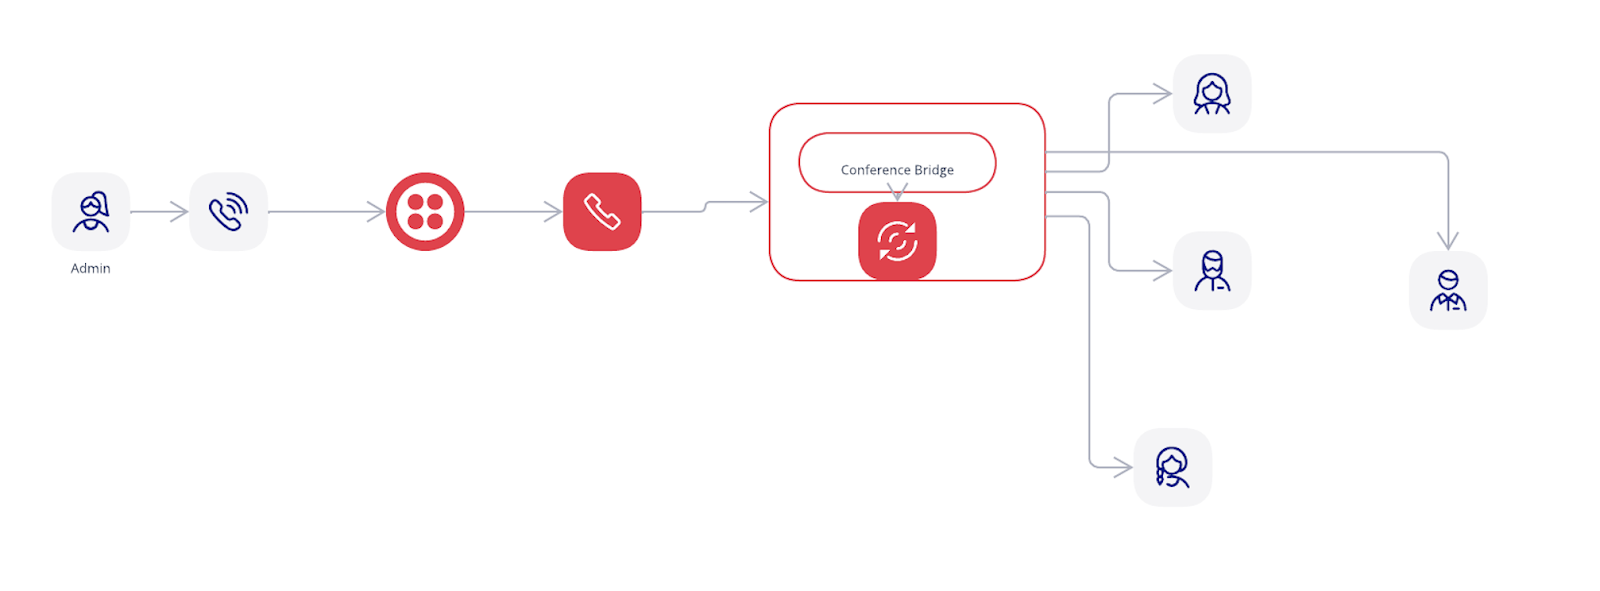 Architecture of a modern conference line using Twilio